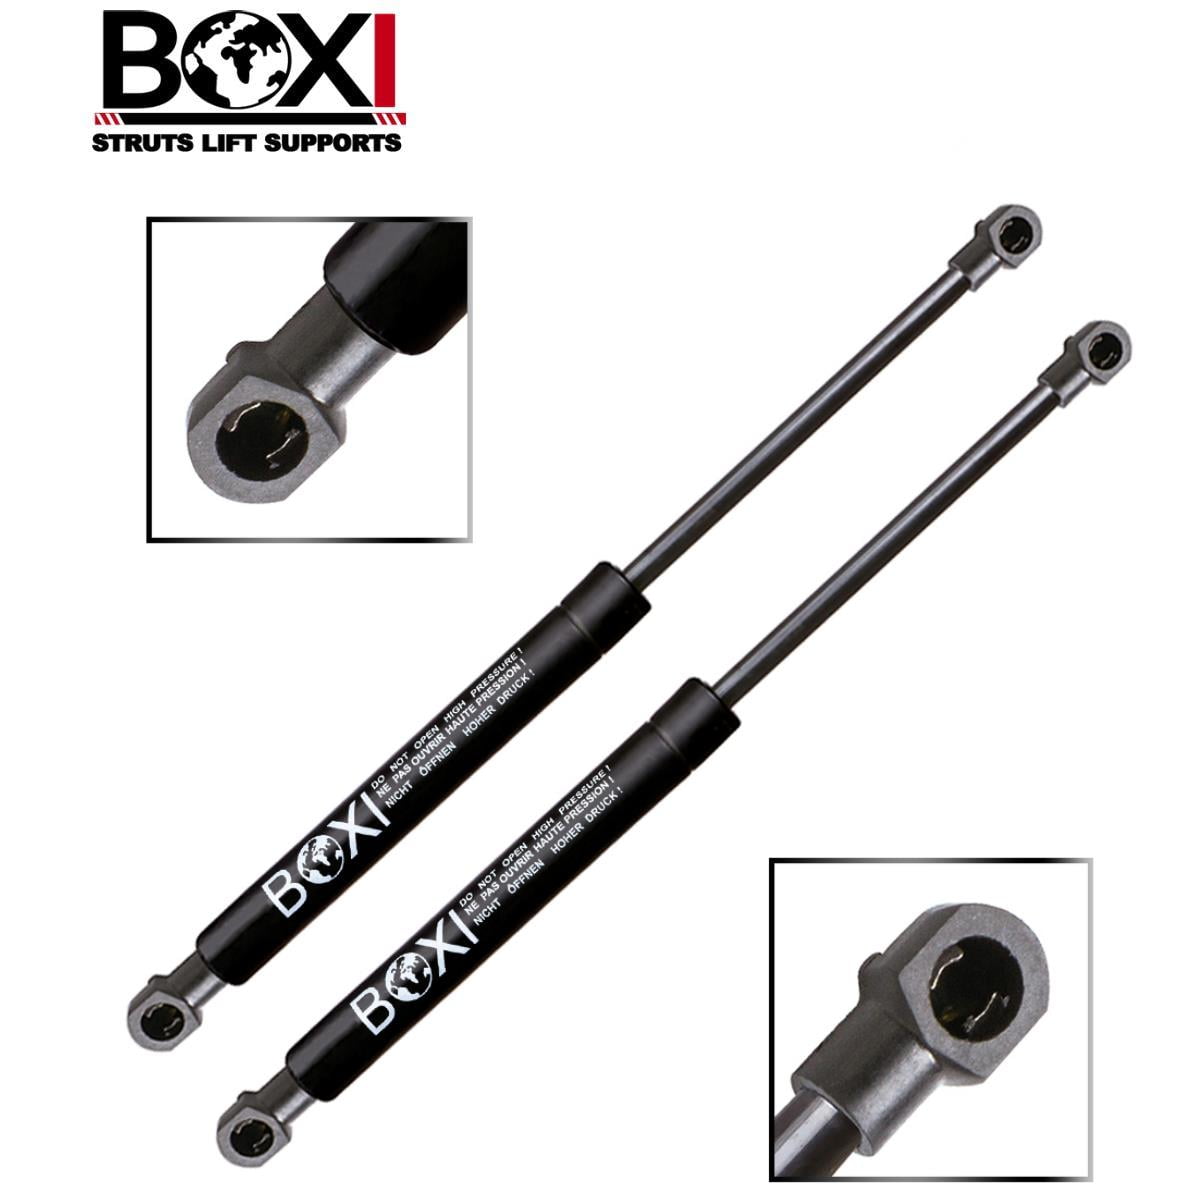 BOXI 2pcs Front Hood Gas Charged Lift Supports Struts Shocks Dampers For BMW E60 E61 5 Series SG402057,6481 